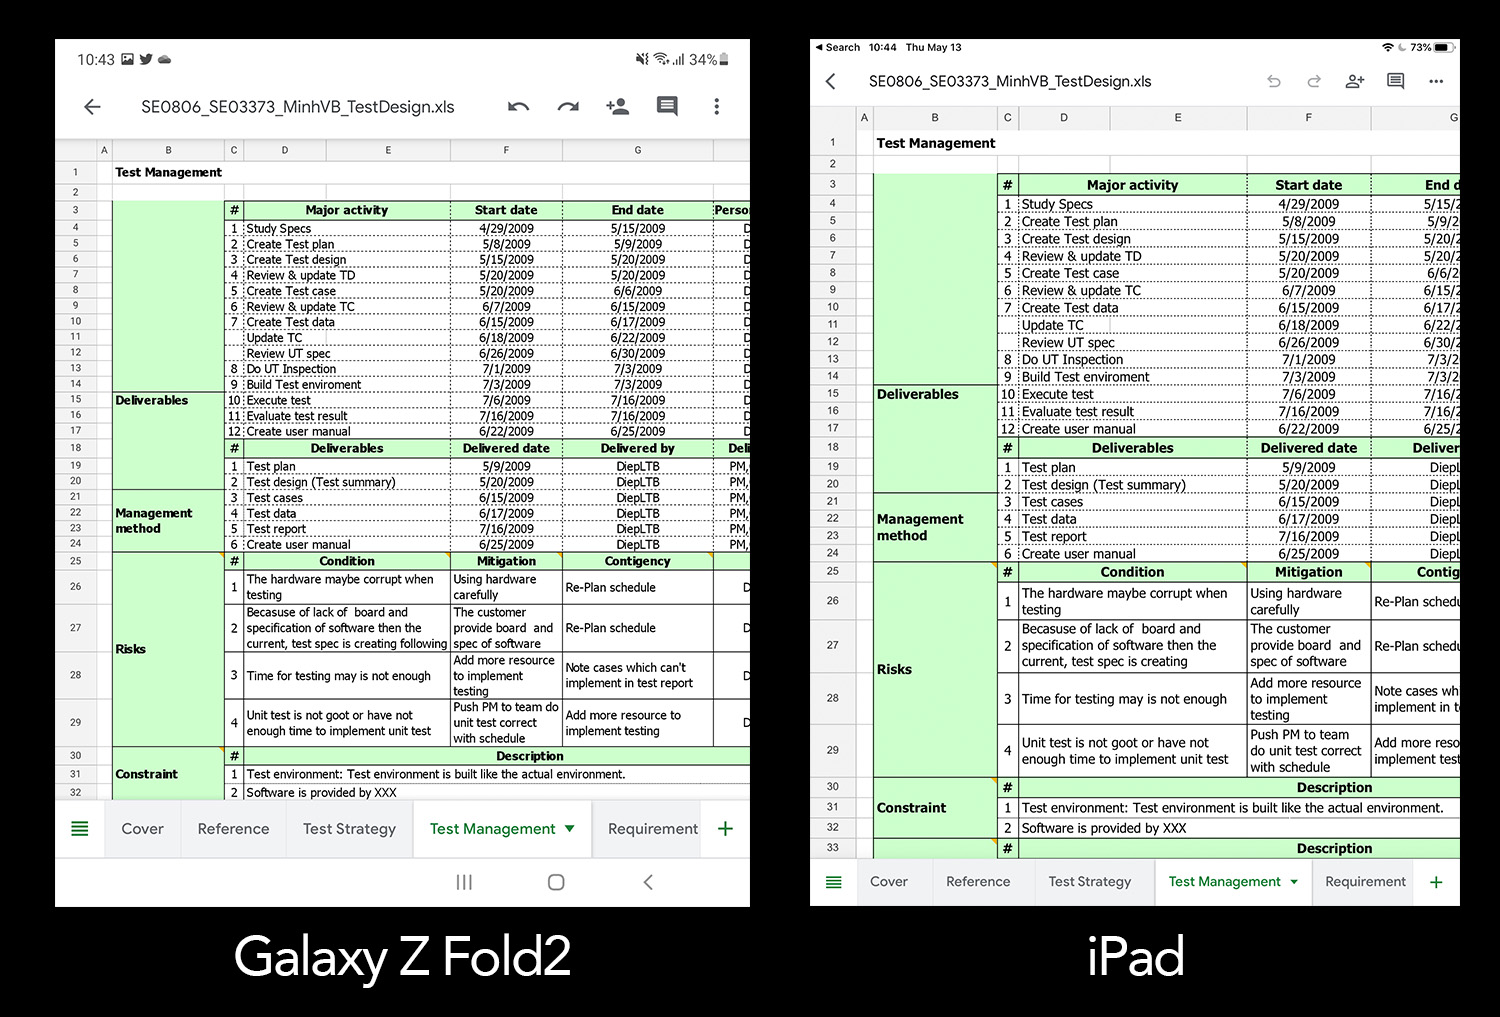 Is the Galaxy Z Fold2 enough to replace the iPad at work | Mobile